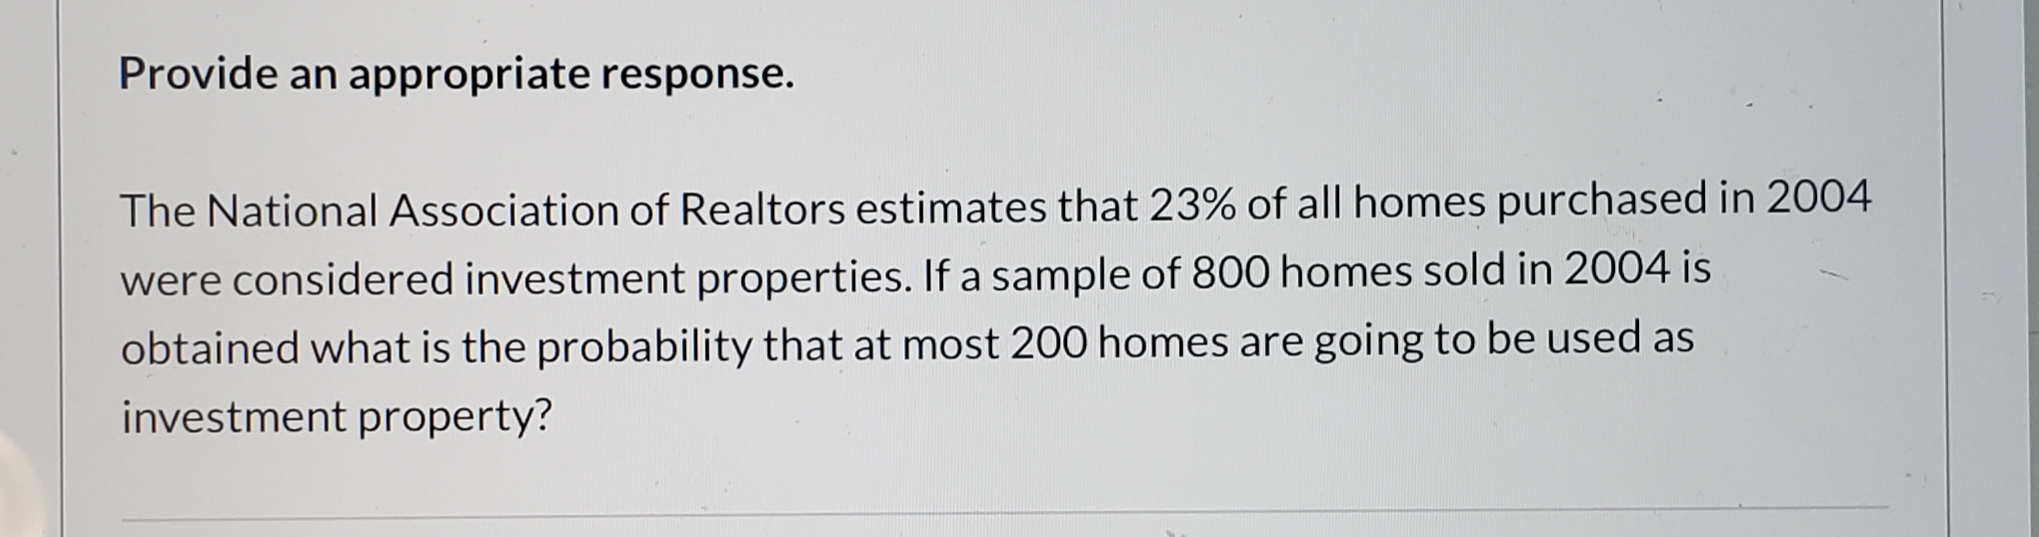 Provide an appropriate response.
The National Association of Realtors estimates that 23% of all homes purchased in 2004
were considered investment properties. If a sample of 800 homes sold in 2004 is
obtained what is the probability that at most 200 homes are going to be used as
investment property?
